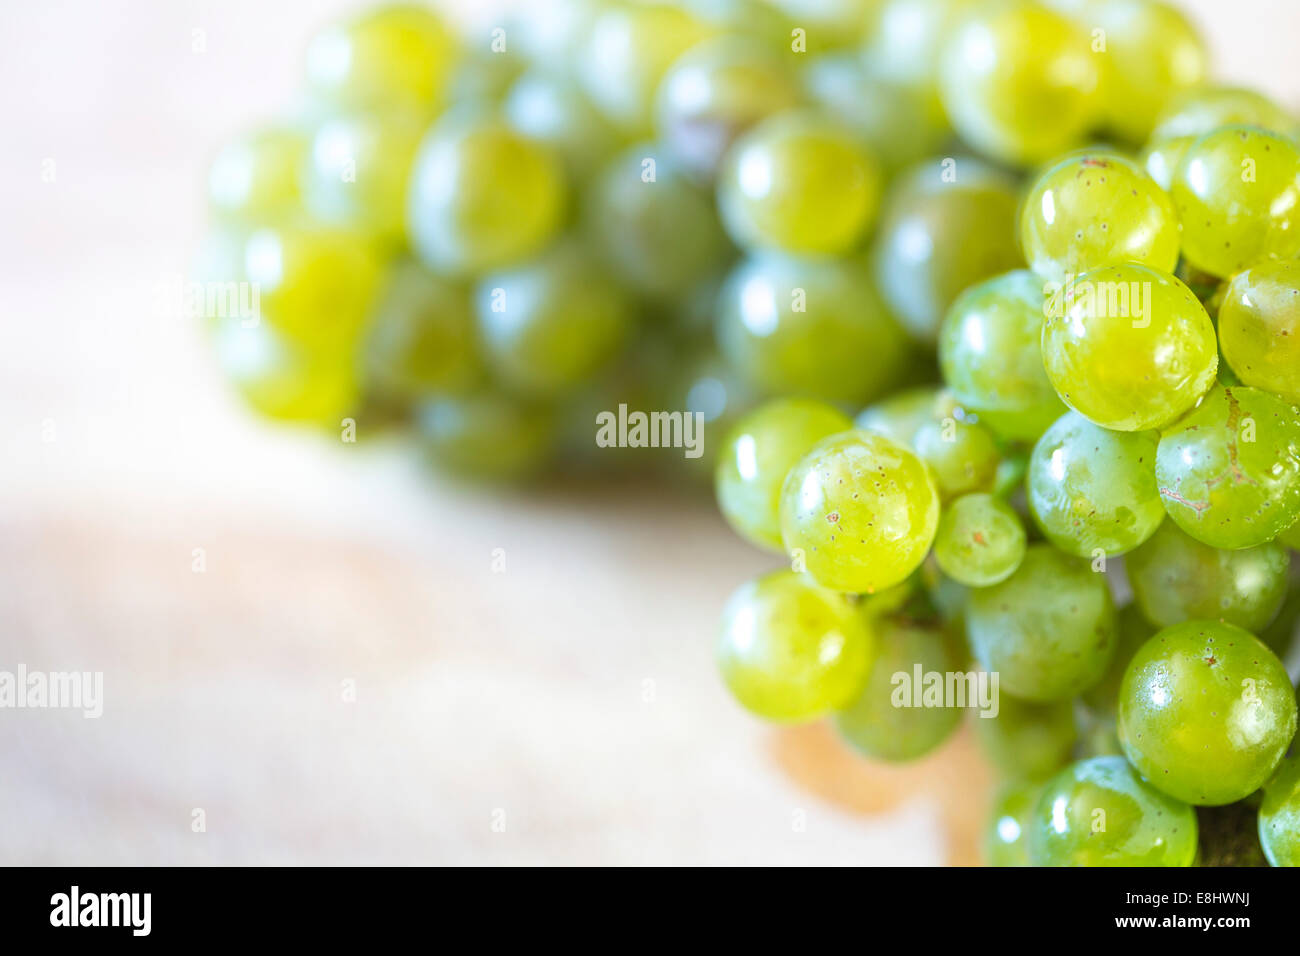 bunch of green grapes on light coloured wooden board with text space on left Stock Photo